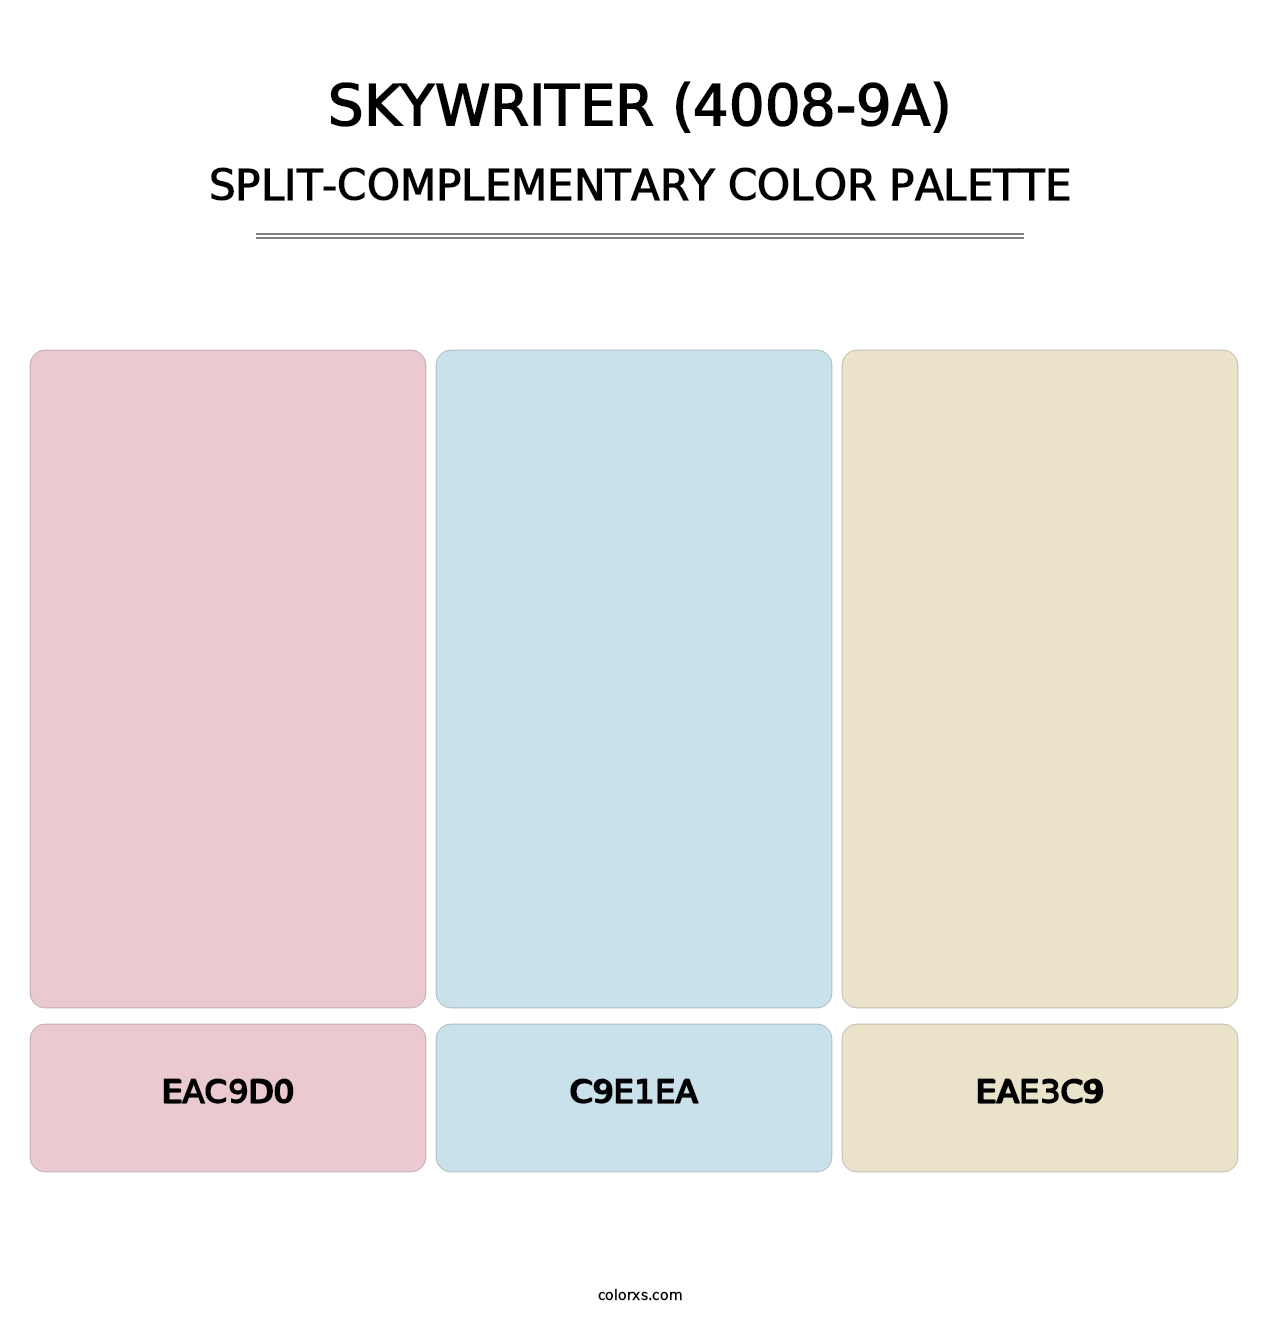 Skywriter (4008-9A) - Split-Complementary Color Palette